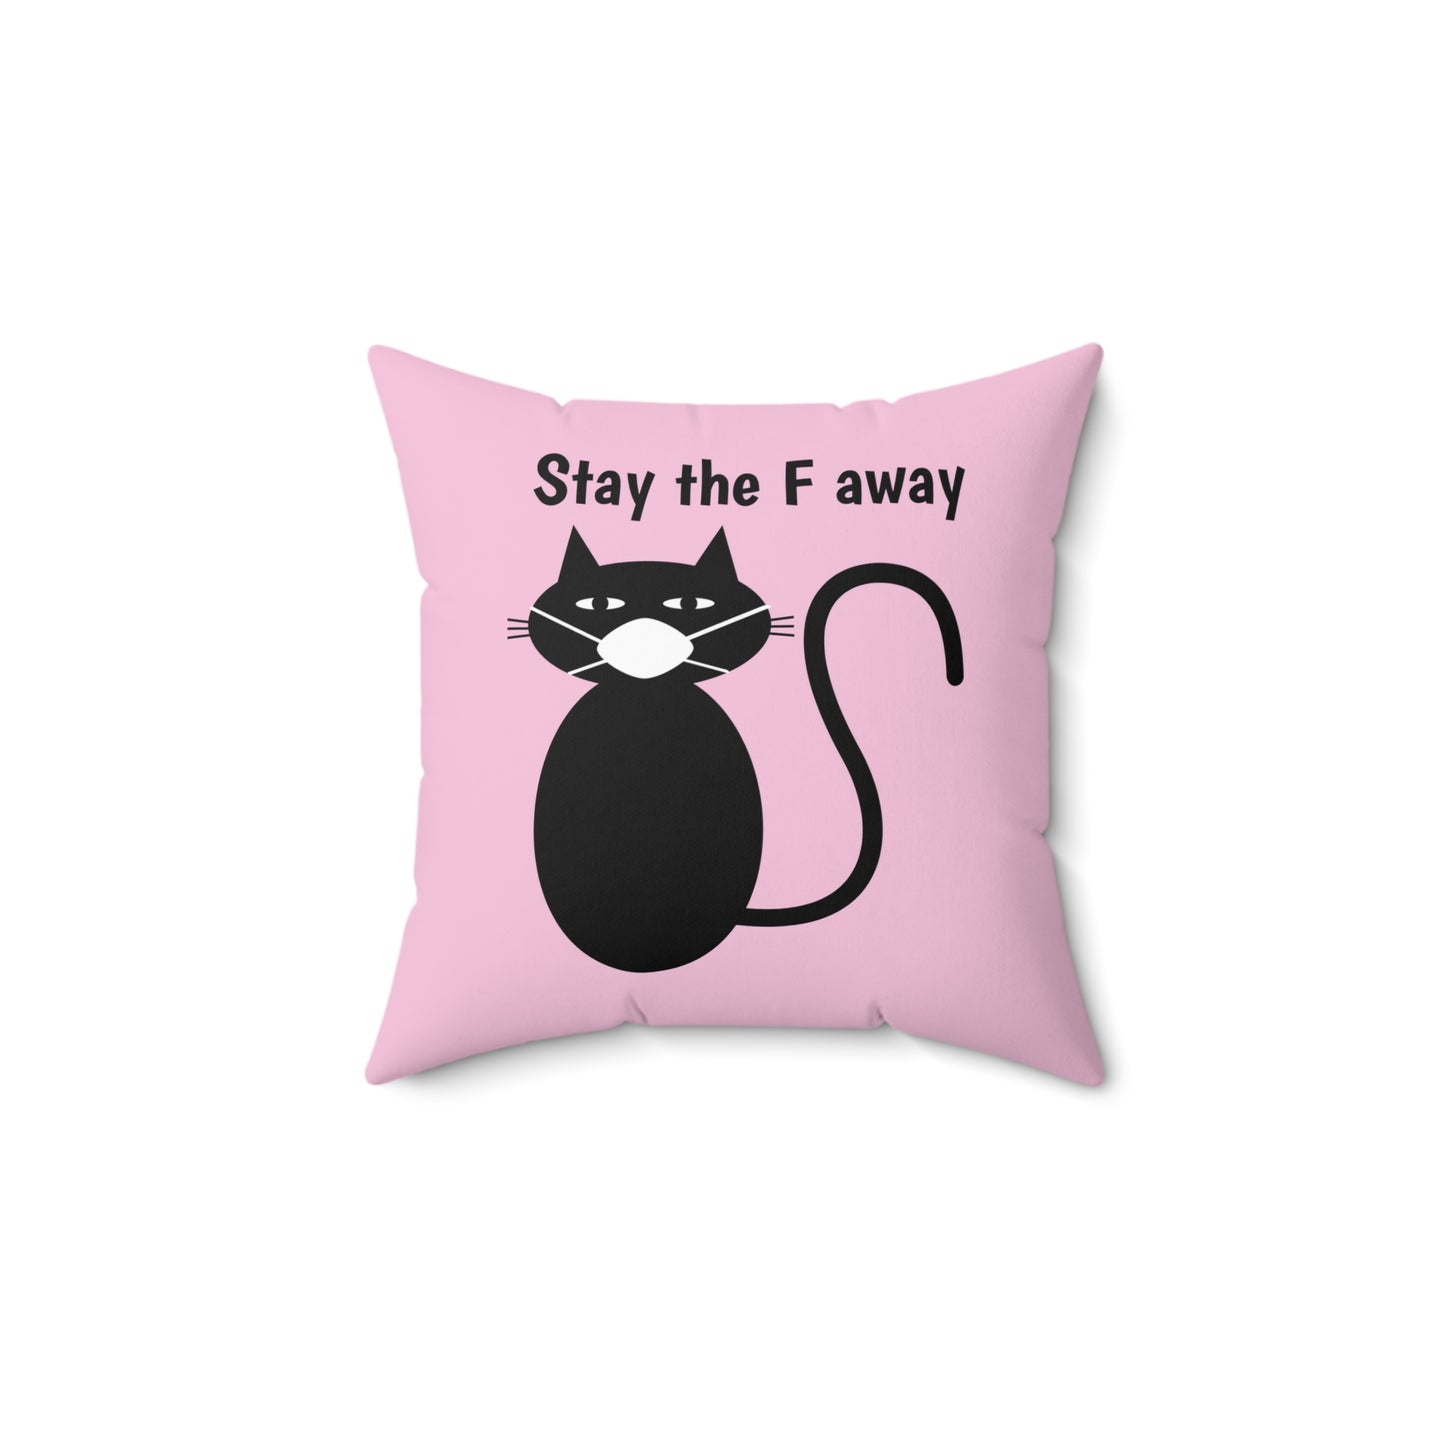 Black cat wearing mask says Stay the F away Pillow